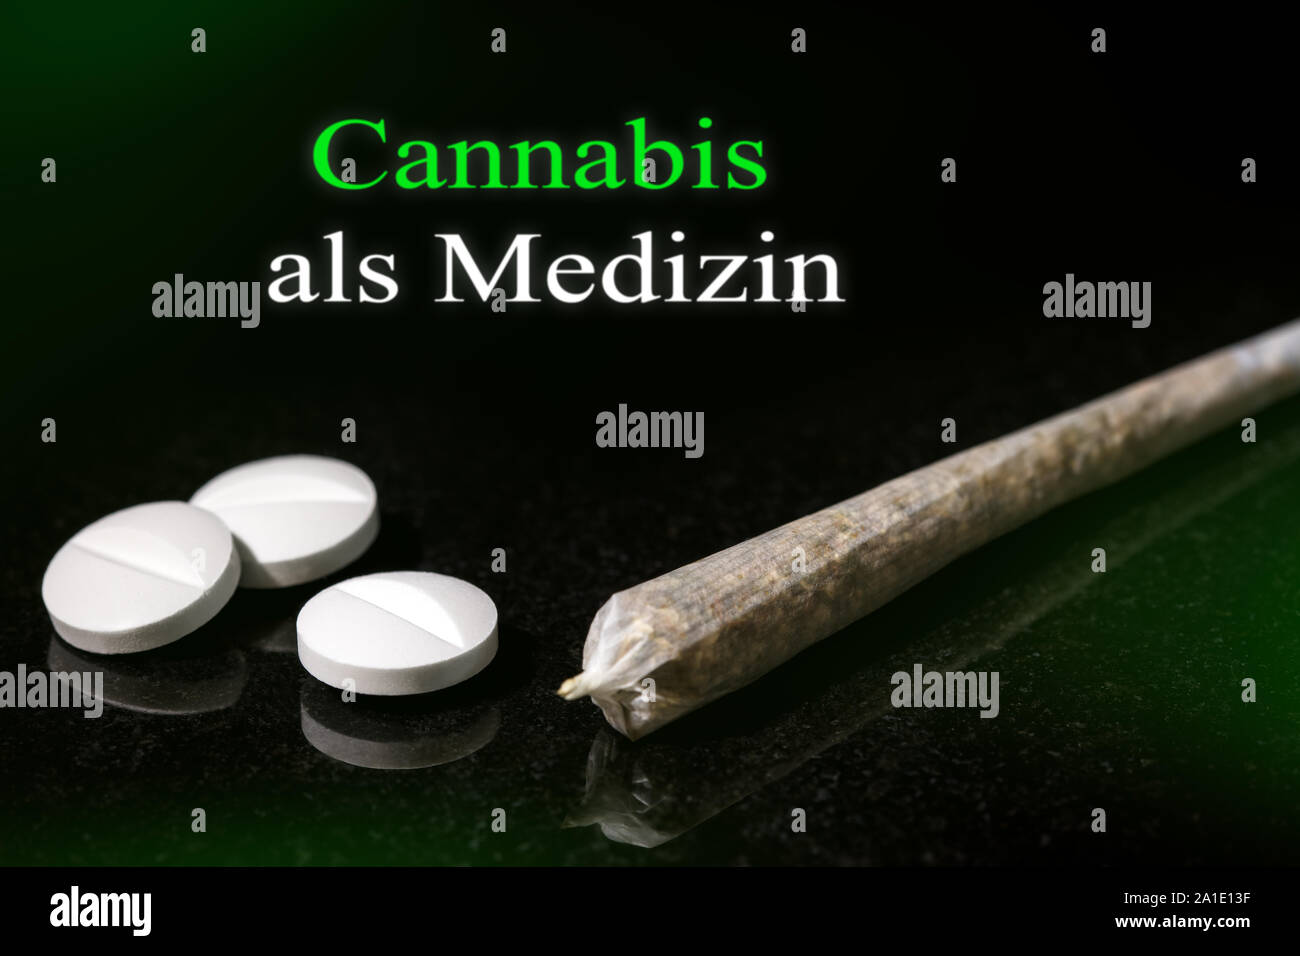 New Law in Germany, Cannabis is legal medicine for Patients, german text Cannabis als Medizin, which means cannabis as medicine Stock Photo